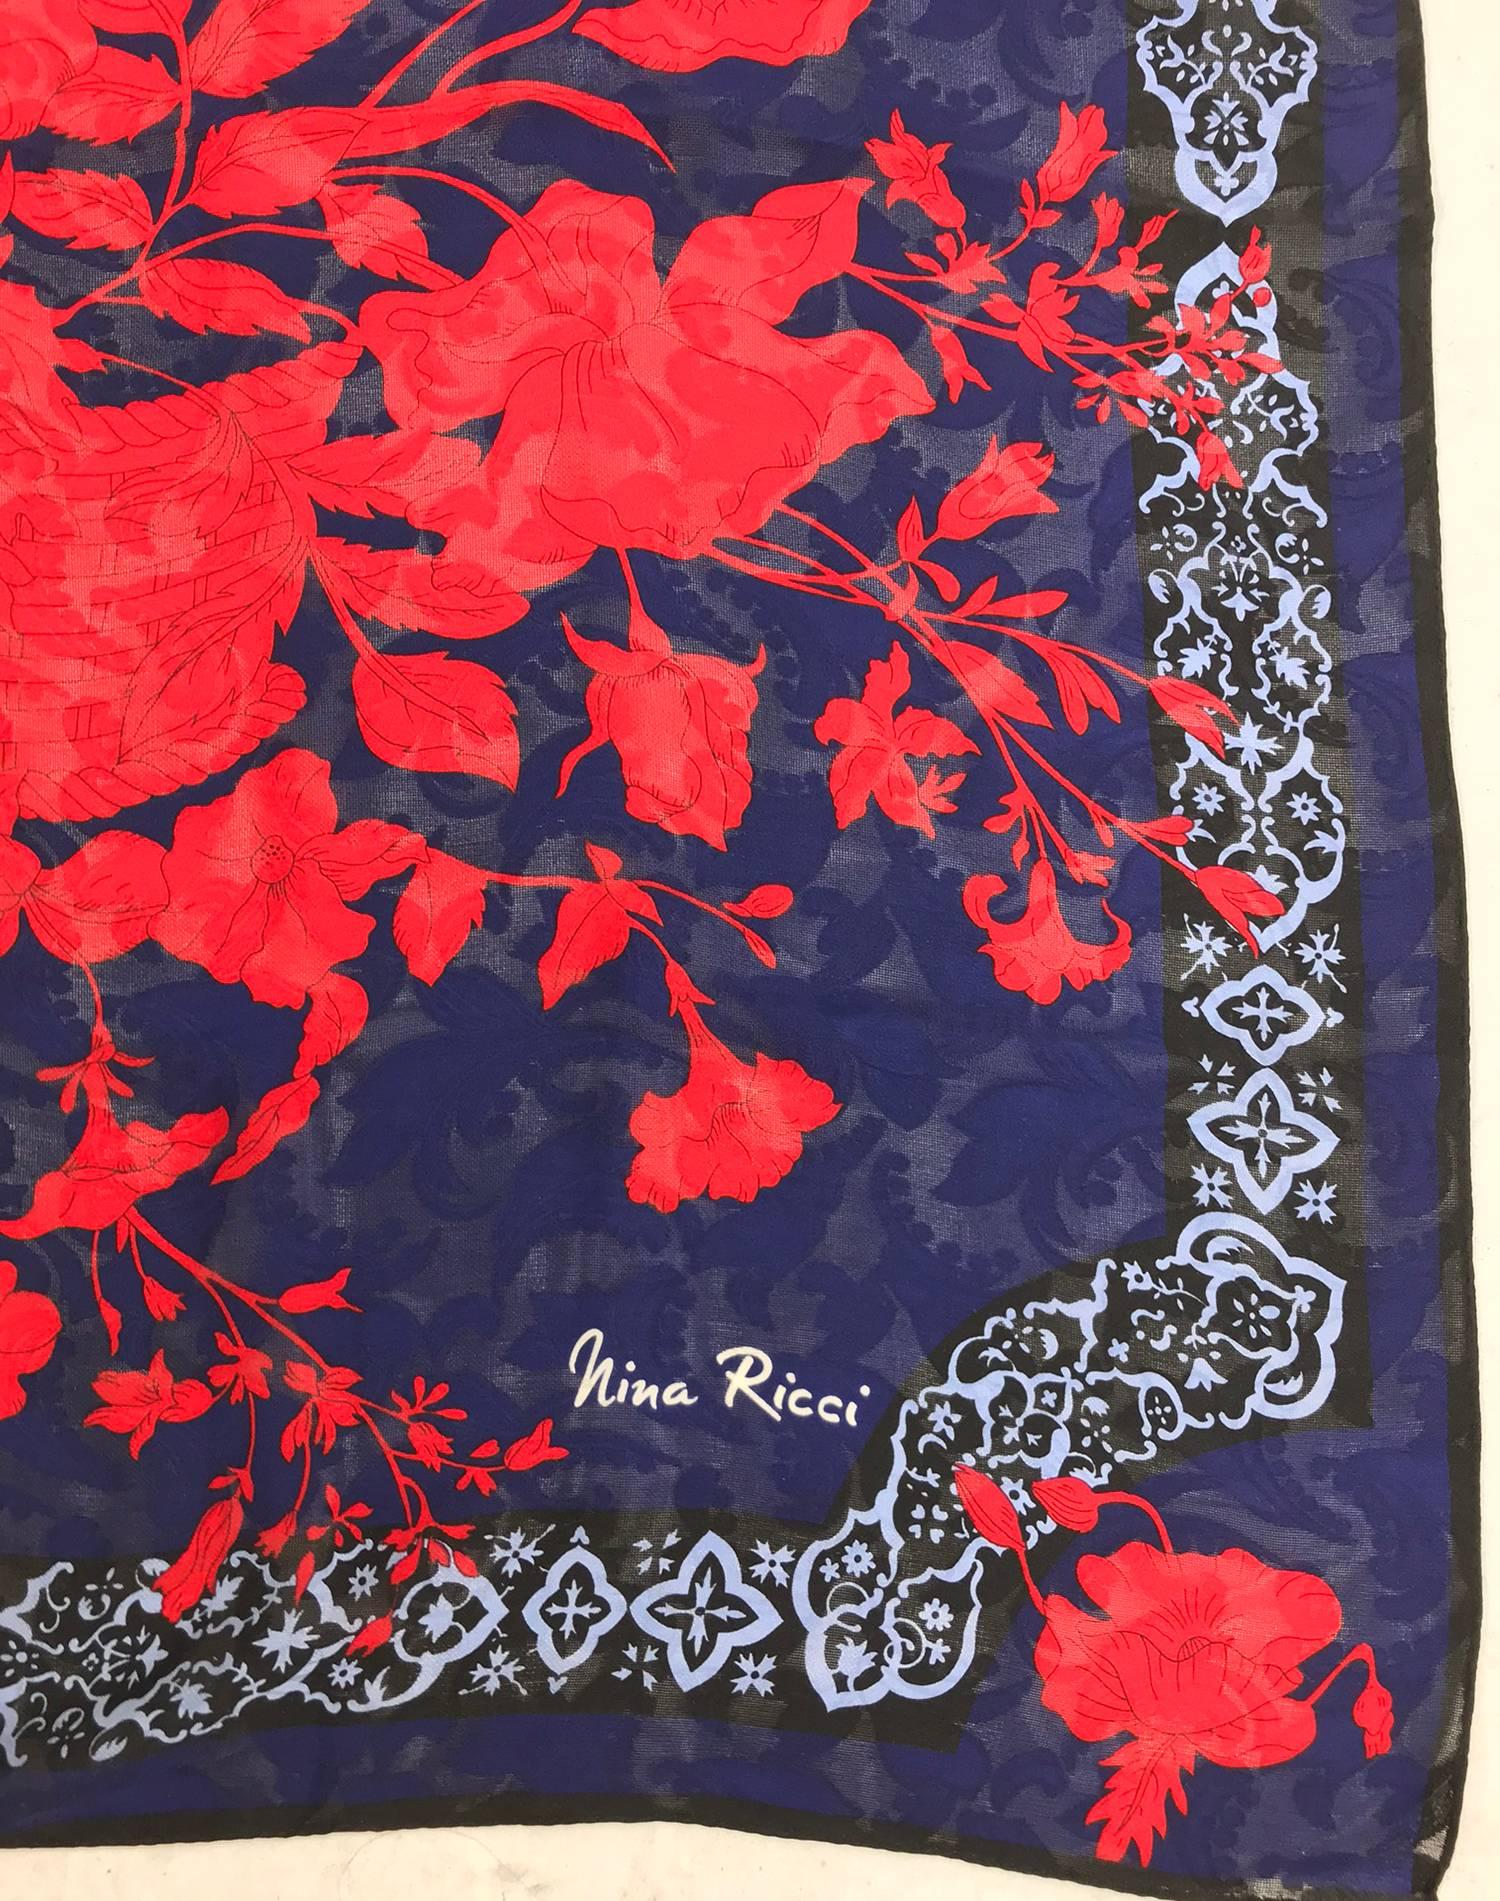 Nina Ricci red and blue floral silk scarf 35